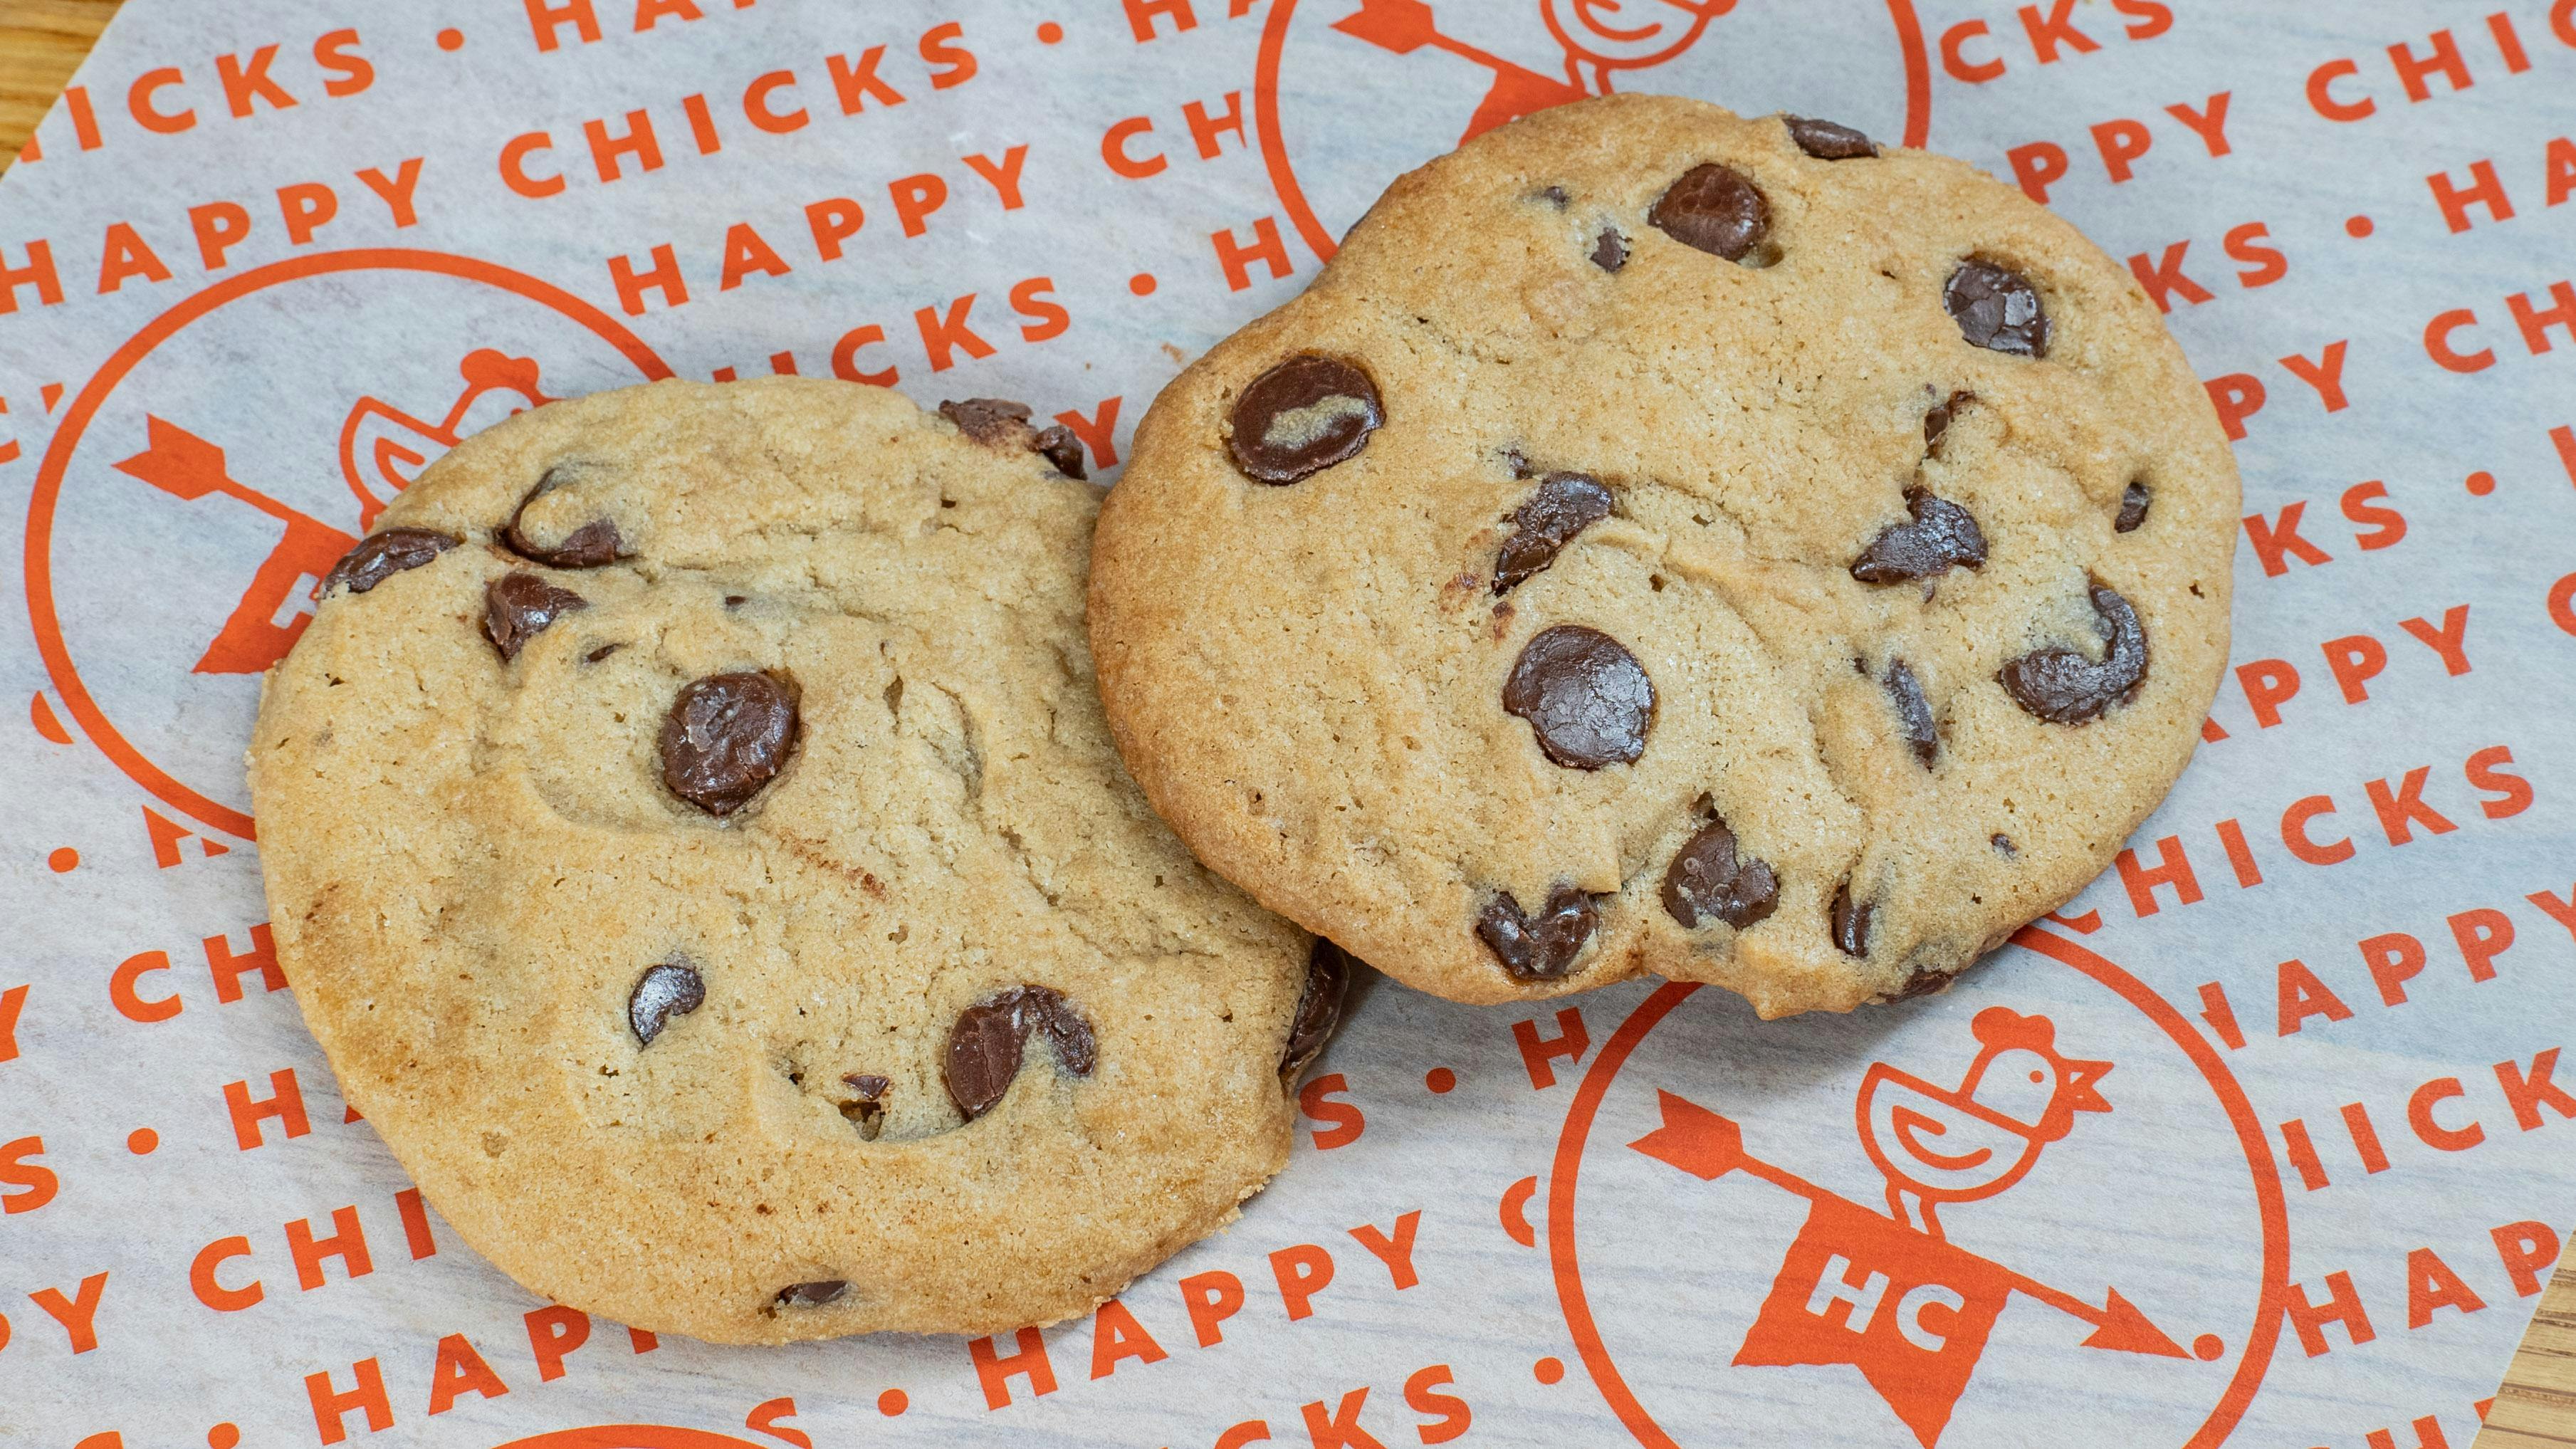 Cookies from Happy Chicks - Research Blvd in Austin, TX